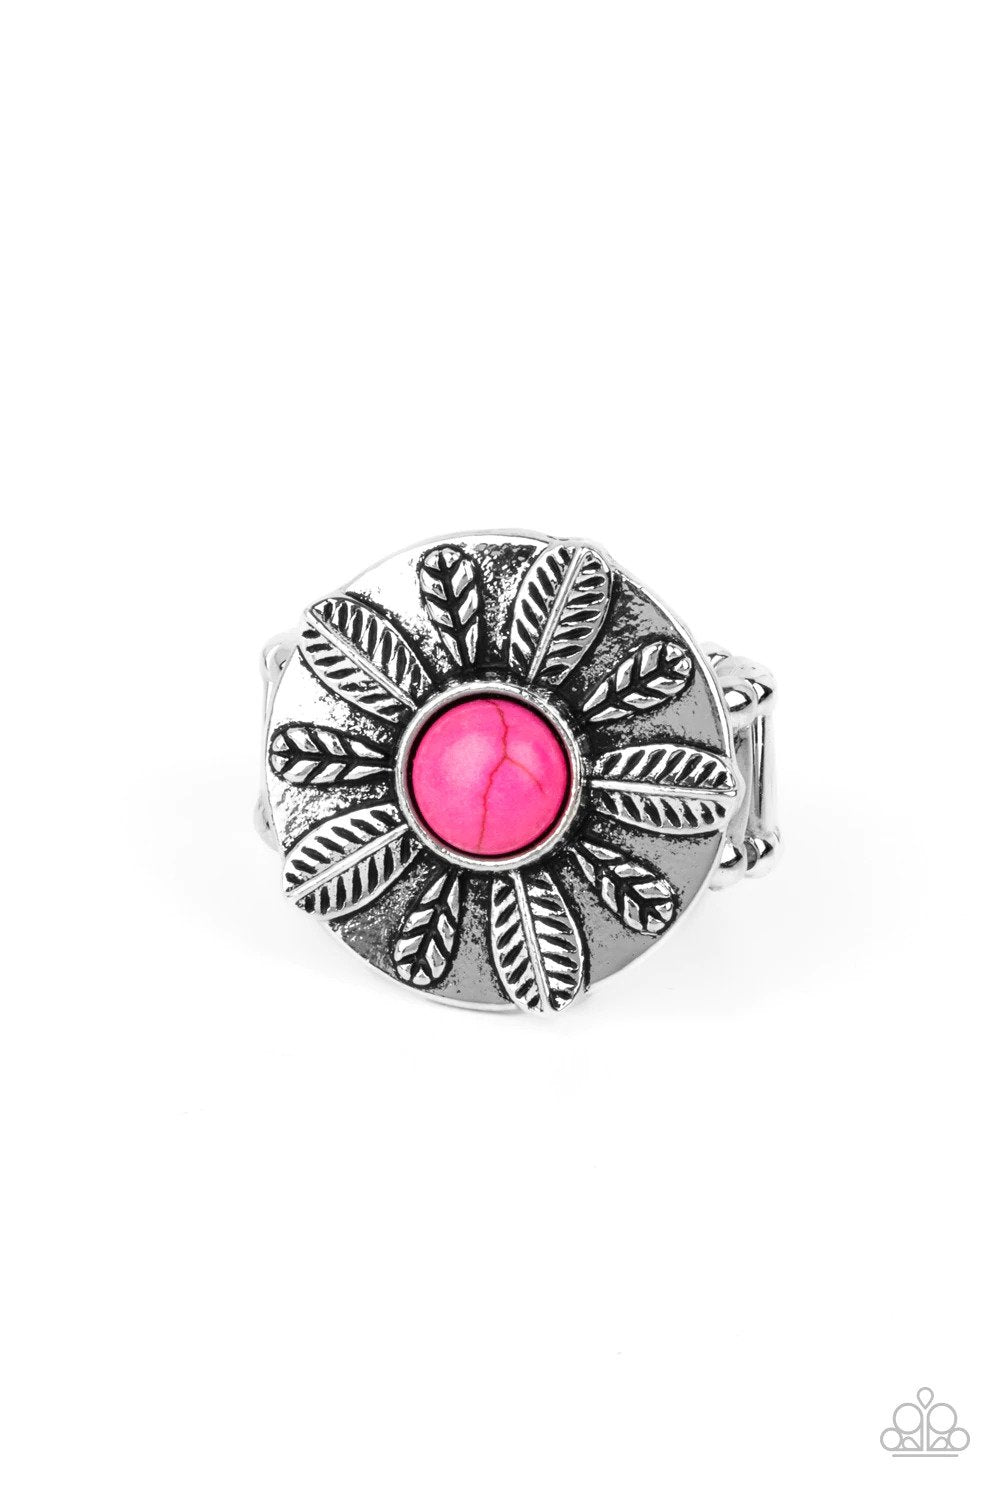 PALMS Reader Pink Ring - Paparazzi Accessories- lightbox - CarasShop.com - $5 Jewelry by Cara Jewels